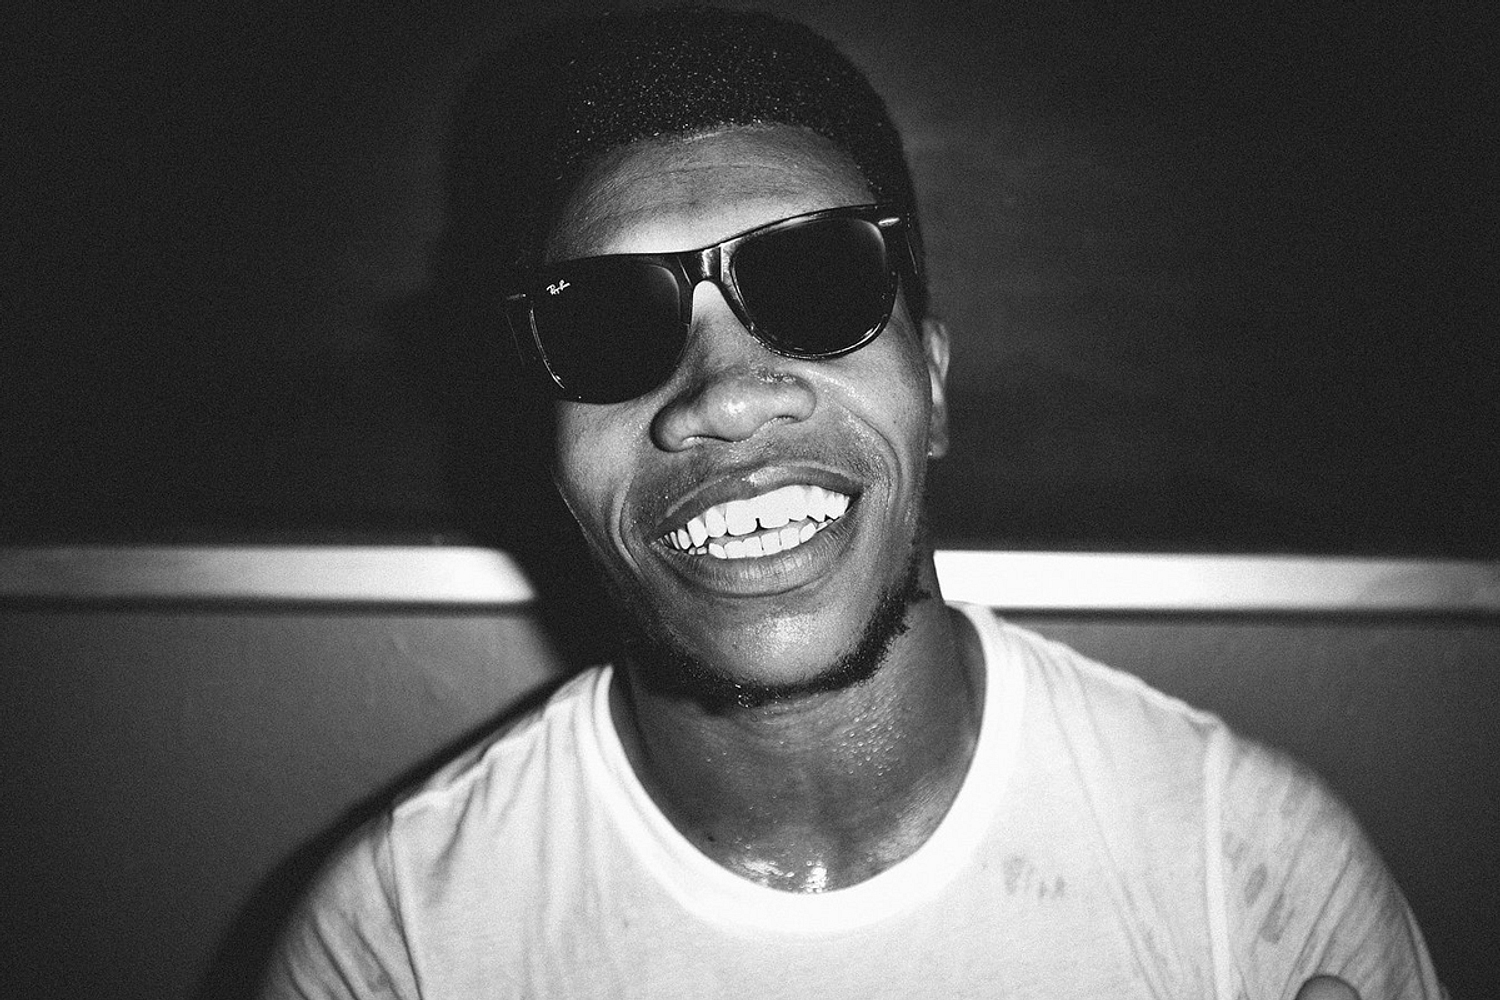 Willis Earl Beal was recently booked into jail for mischief and harassment